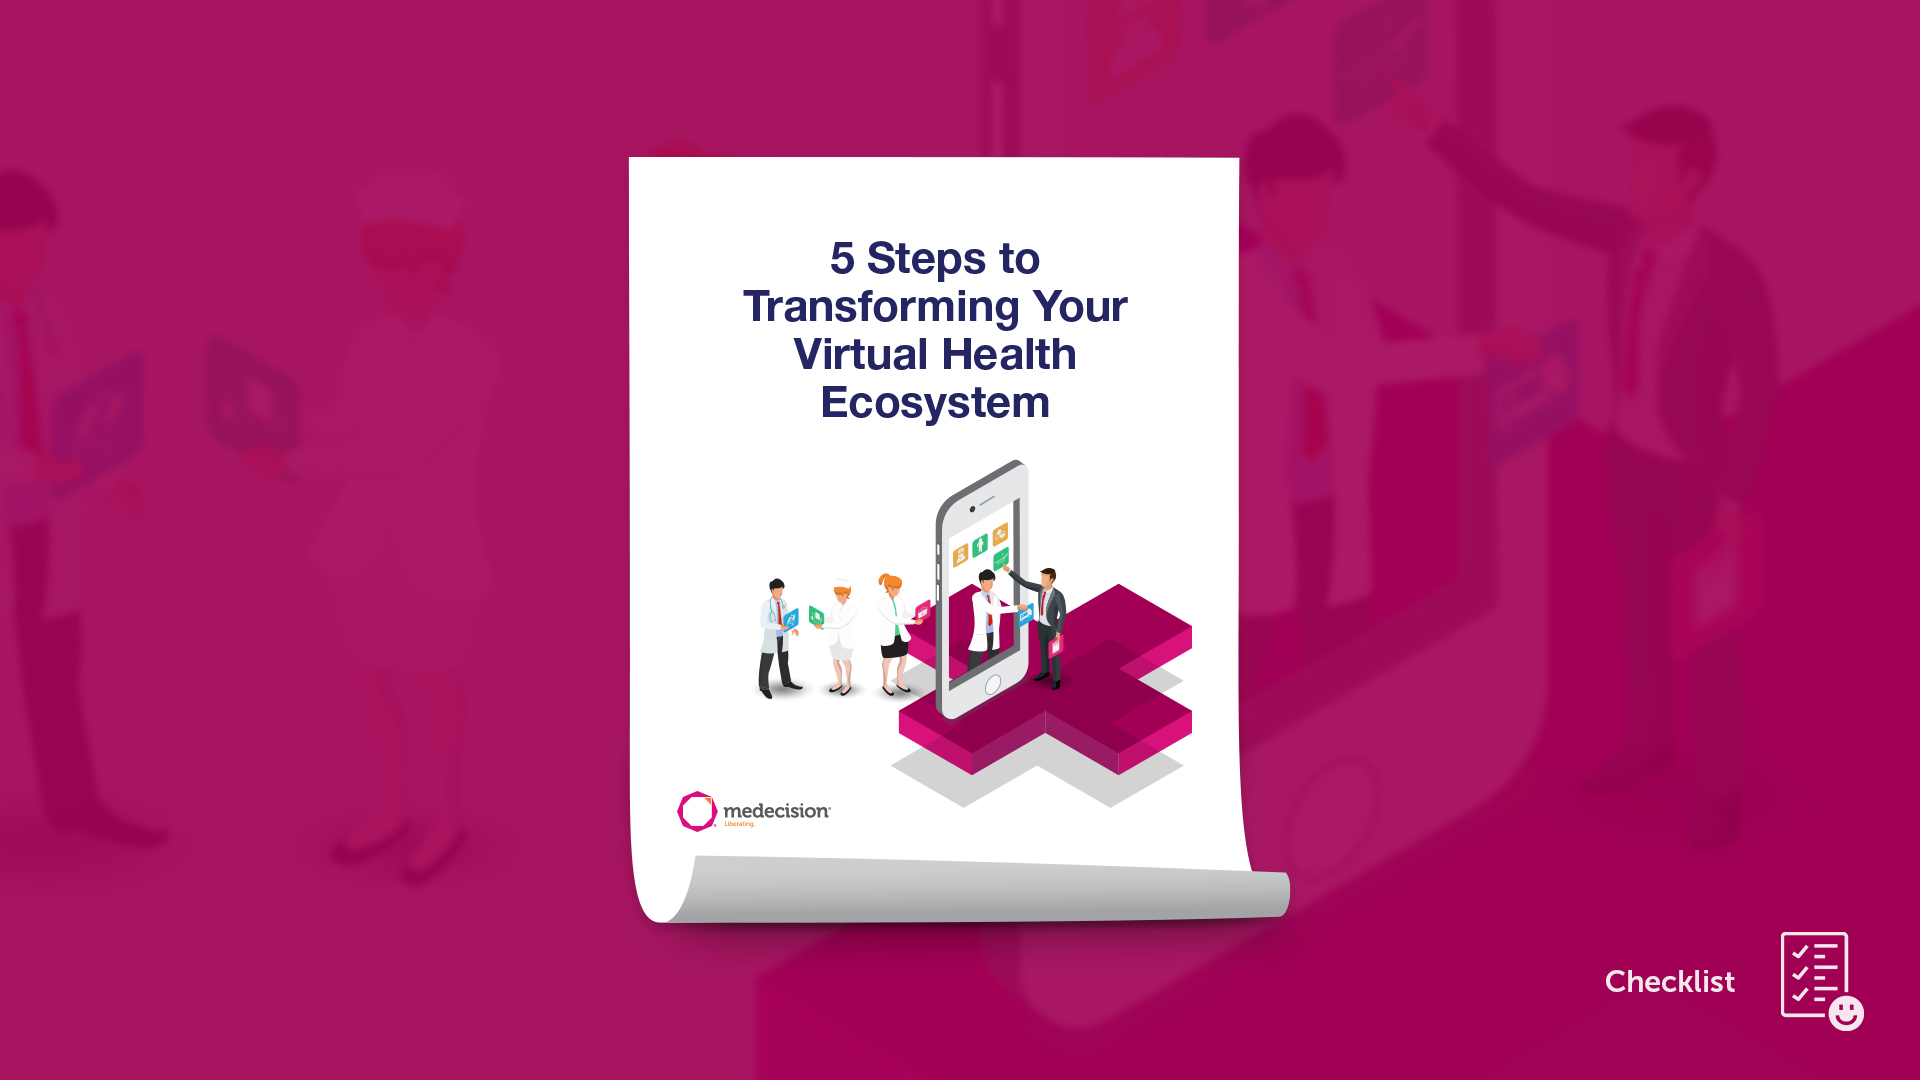 5 Steps to Transforming Your Virtual Health Ecosystem